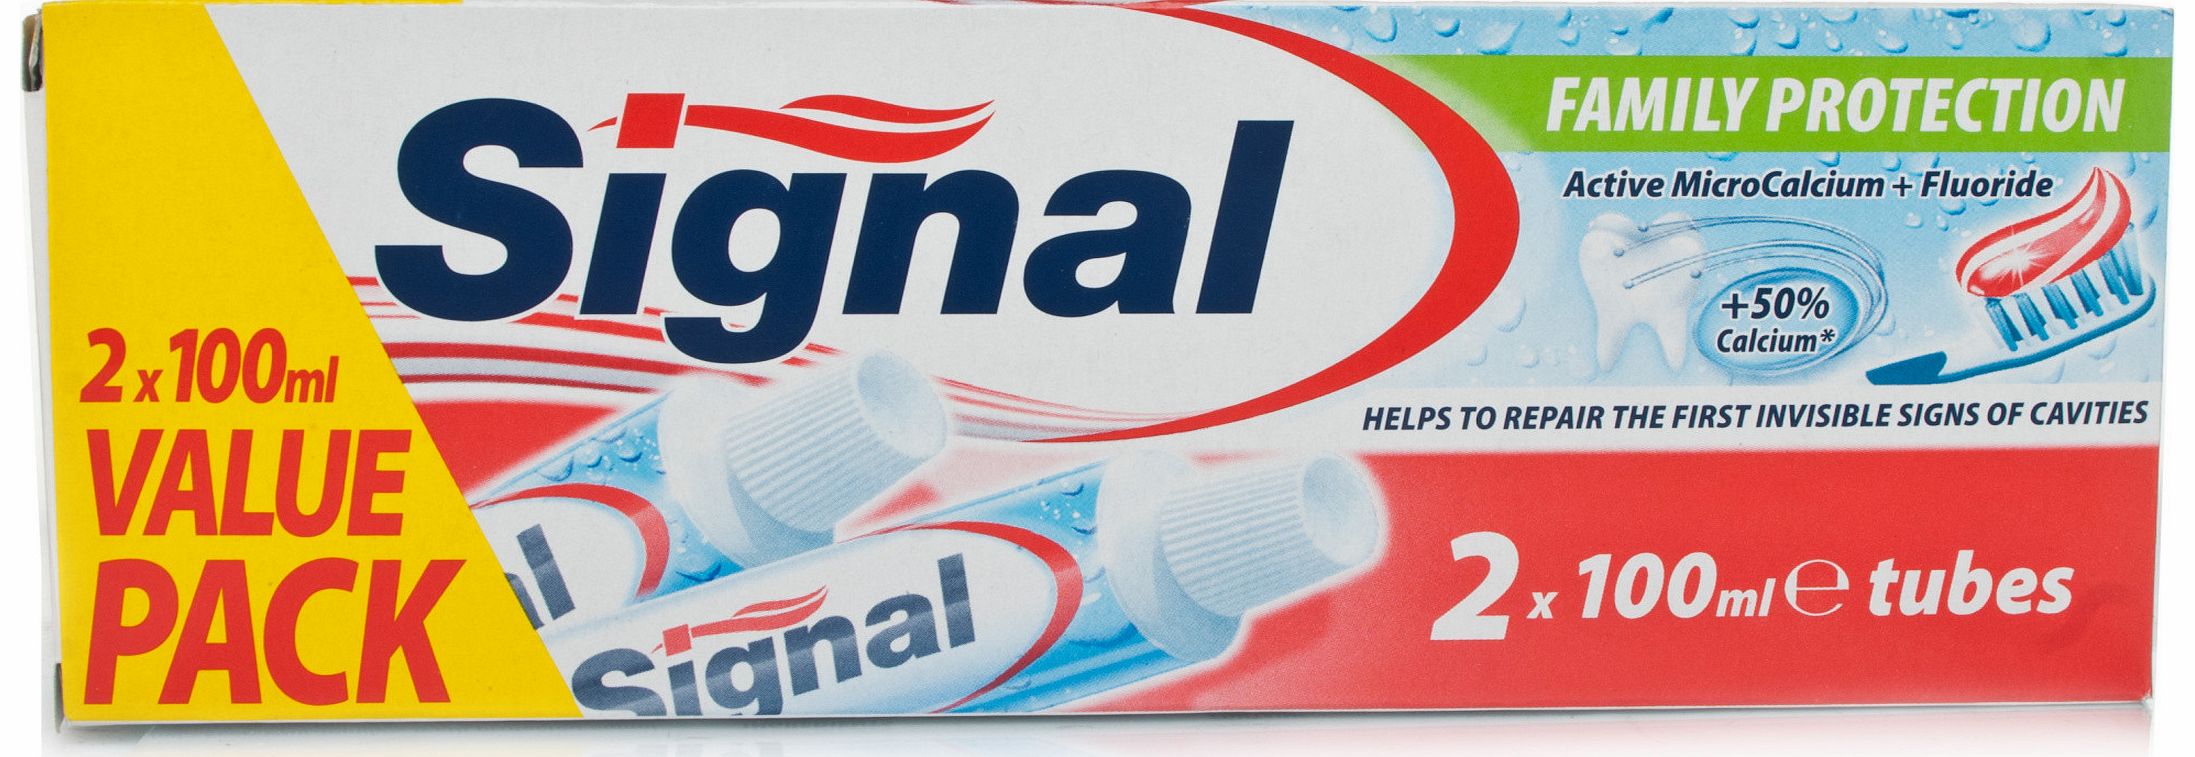 Signal Family Protection Original Toothpaste